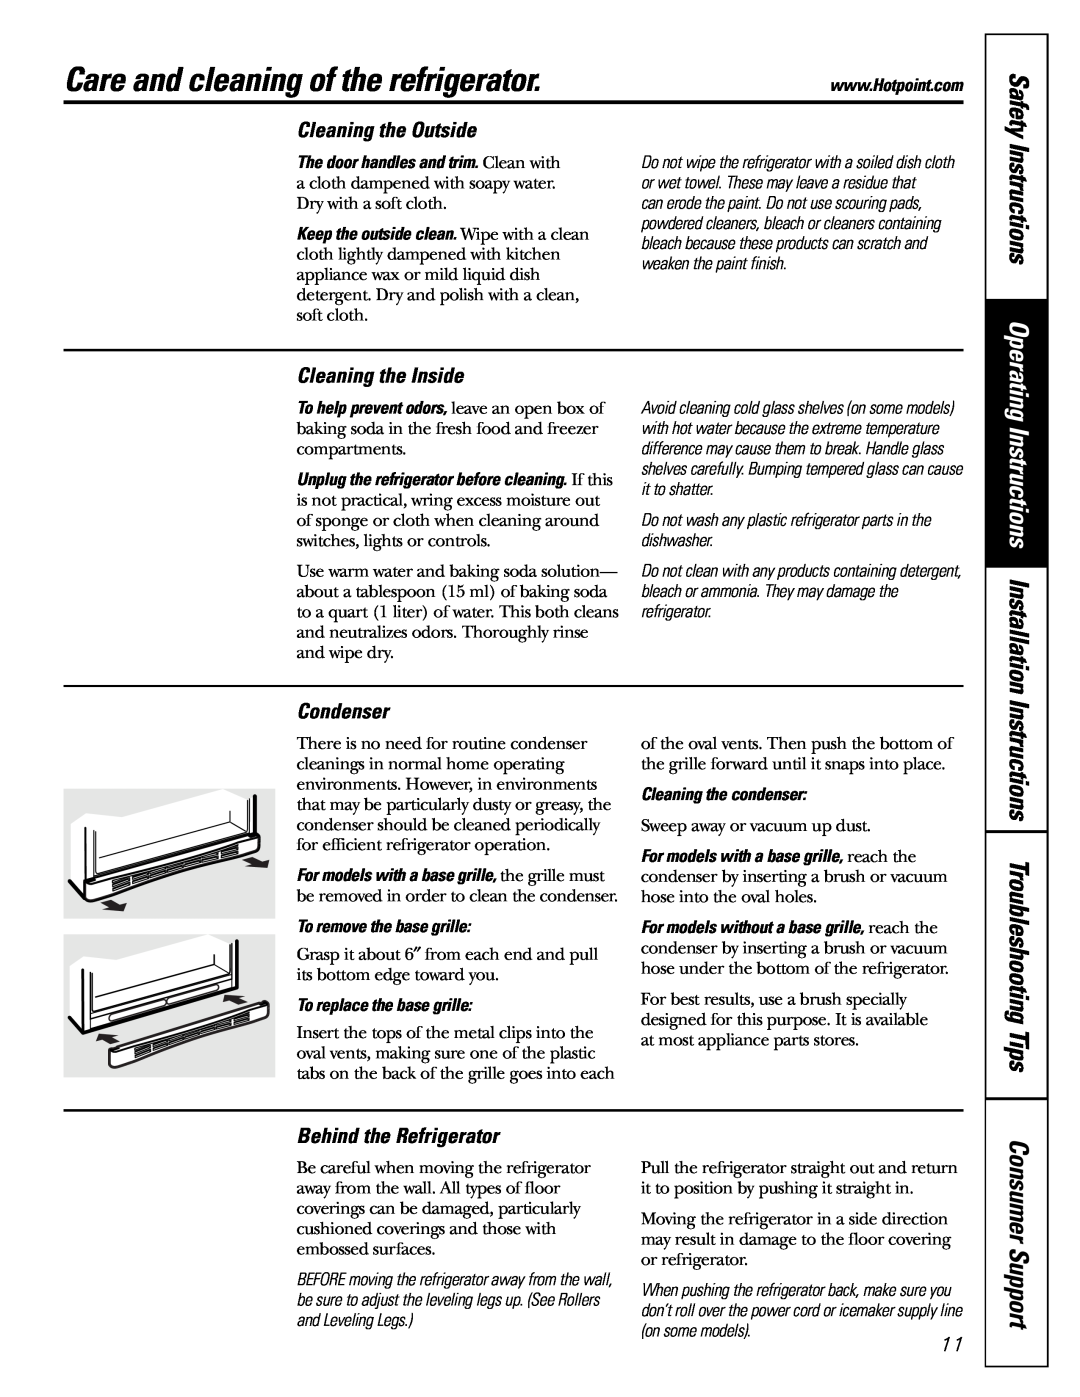 Hotpoint 19 Care and cleaning of the refrigerator, Instructions Troubleshooting Tips, Cleaning the Outside, Condenser 